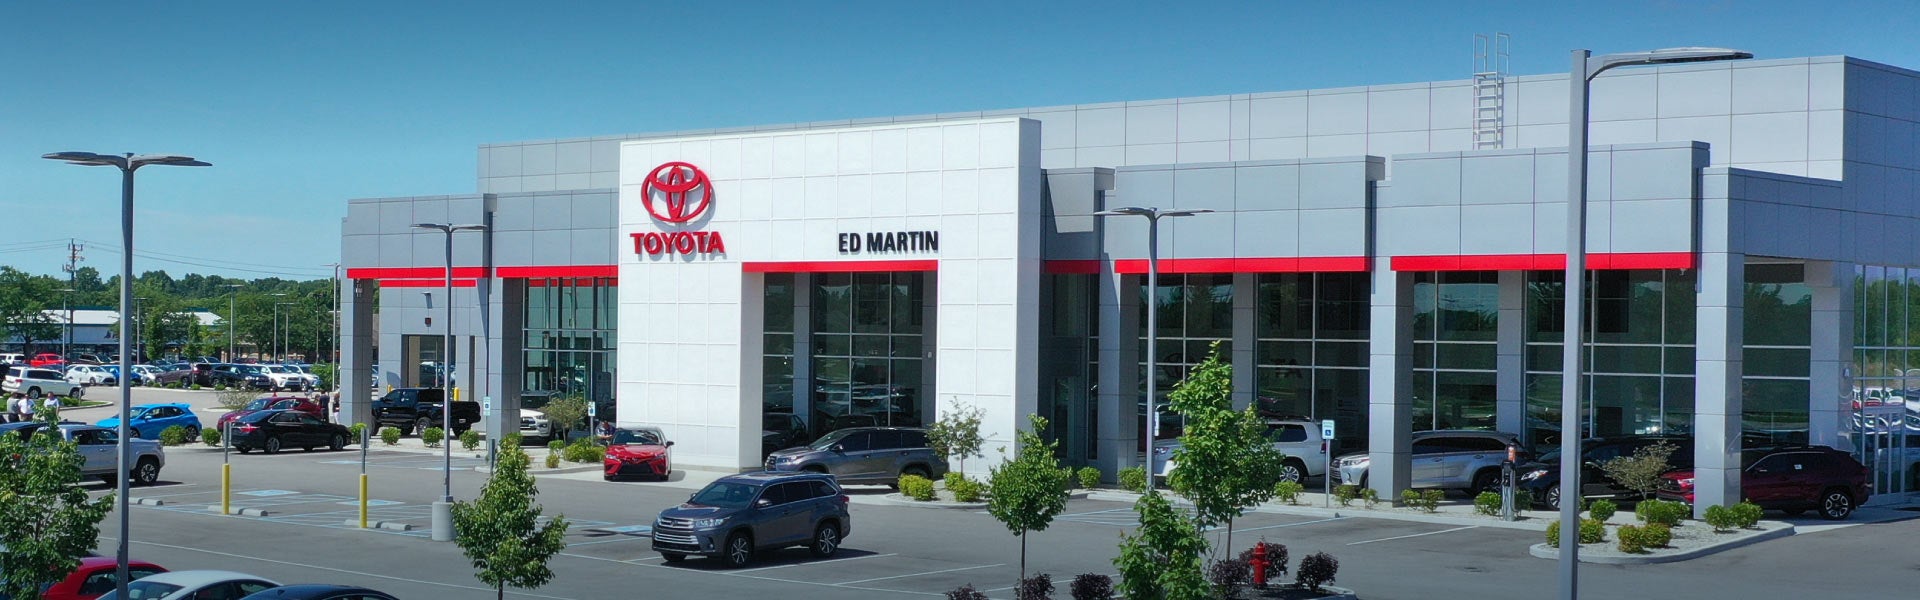 Ed Martin Nissan of Fishers near Noblesville, IN